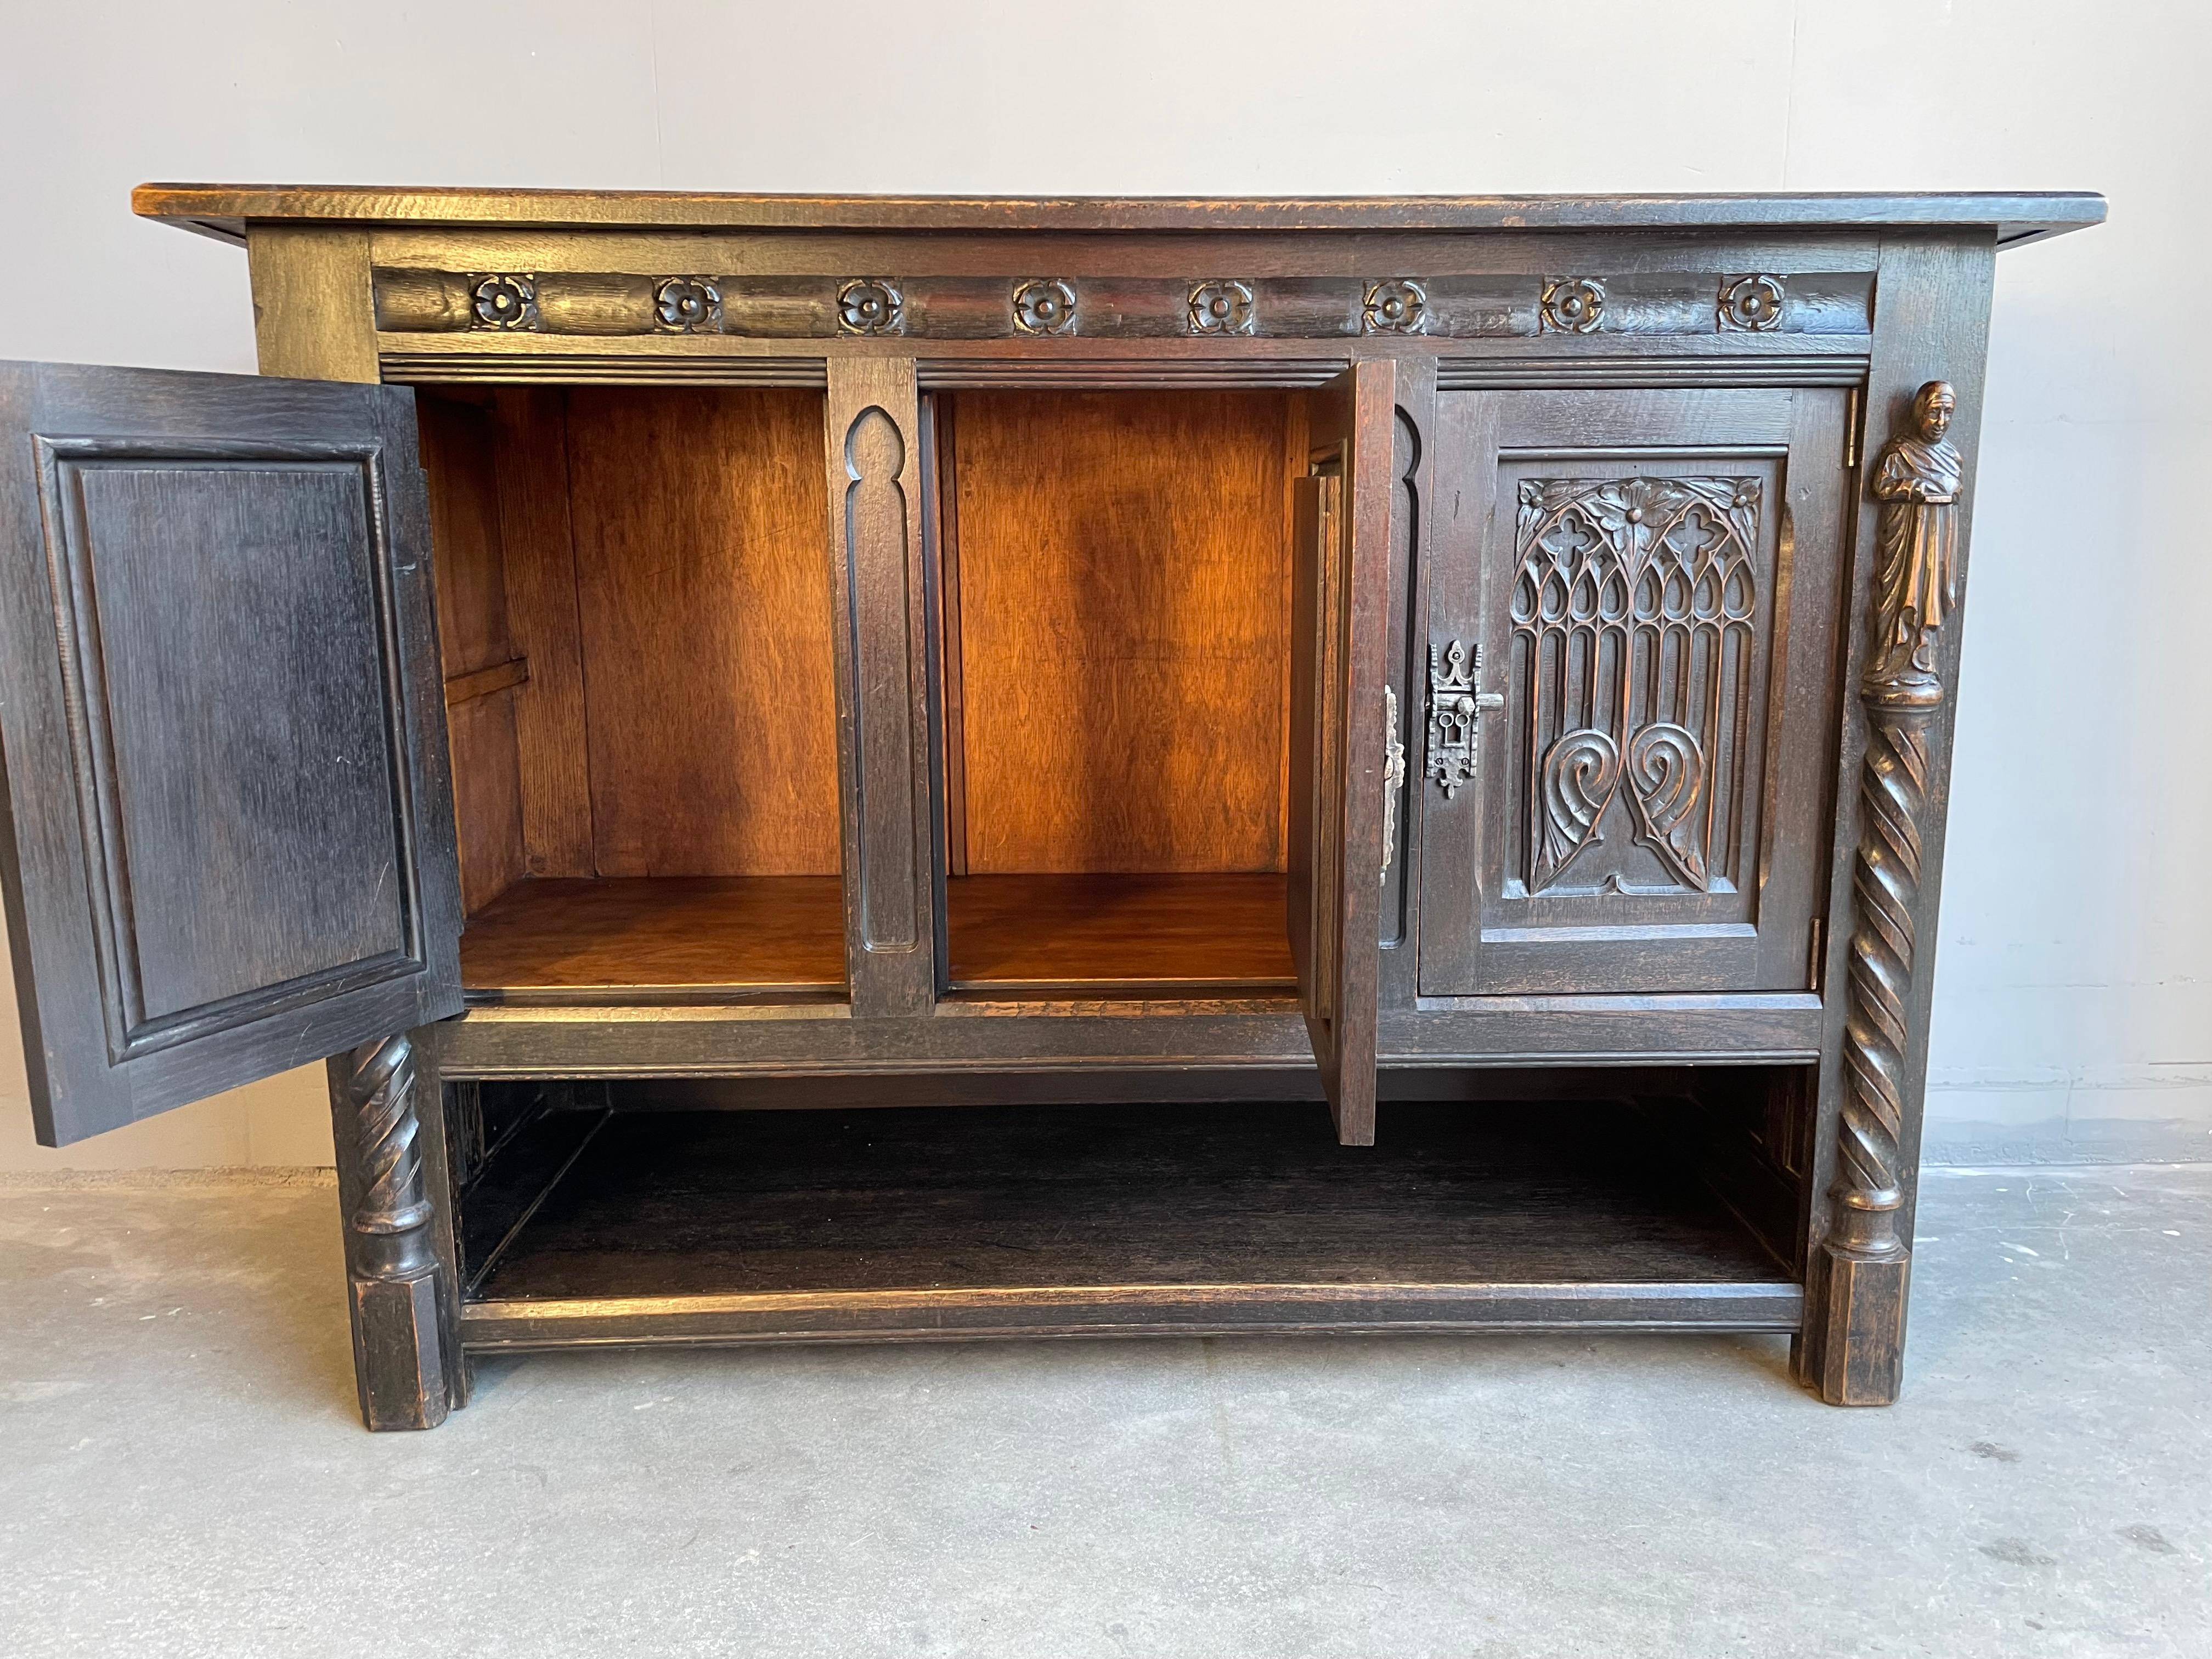 Hand-Carved Stunning & Rare Hand Carved & Ebonized Gothic Revival Sideboard / Small Credenza